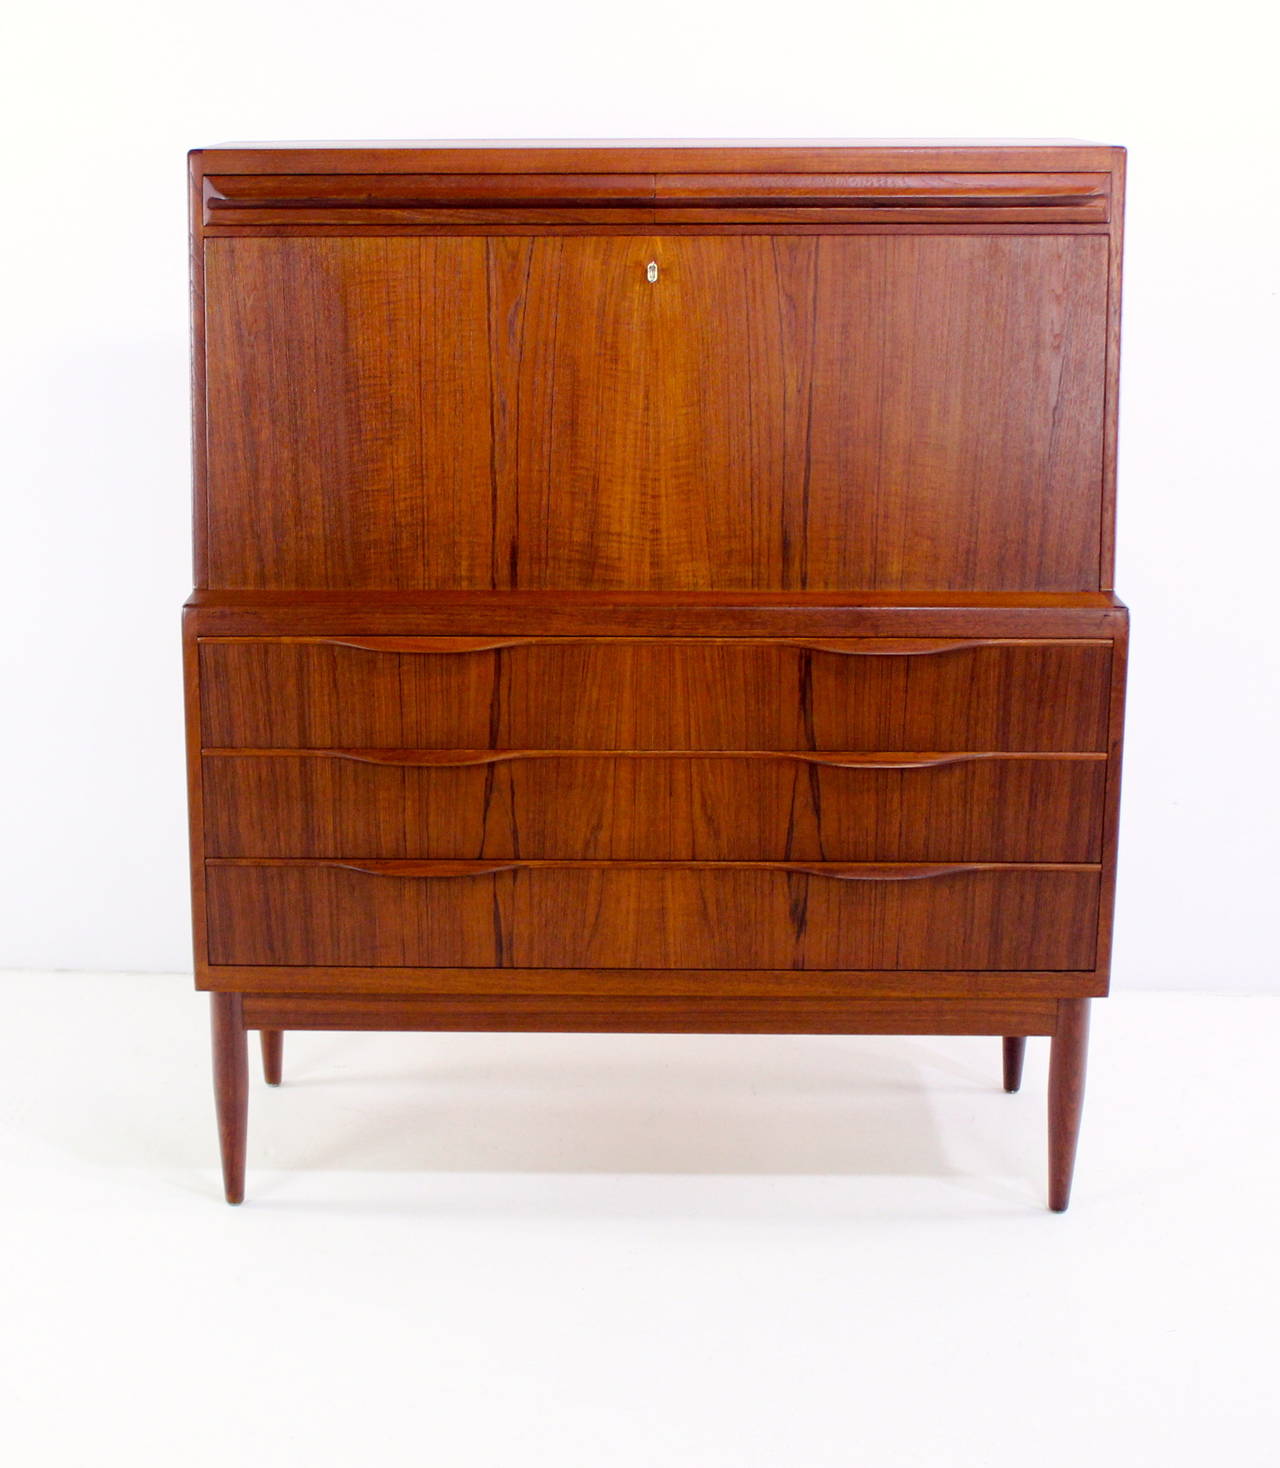 Danish modern secretary designed by Ib Kofod-Larsen.
Rich teak with book matched grain on drawer fronts.
Locking drop down front opens to two secret drawers at top.
Sliding doors in the middle above three small drawers.
Lower portion has three